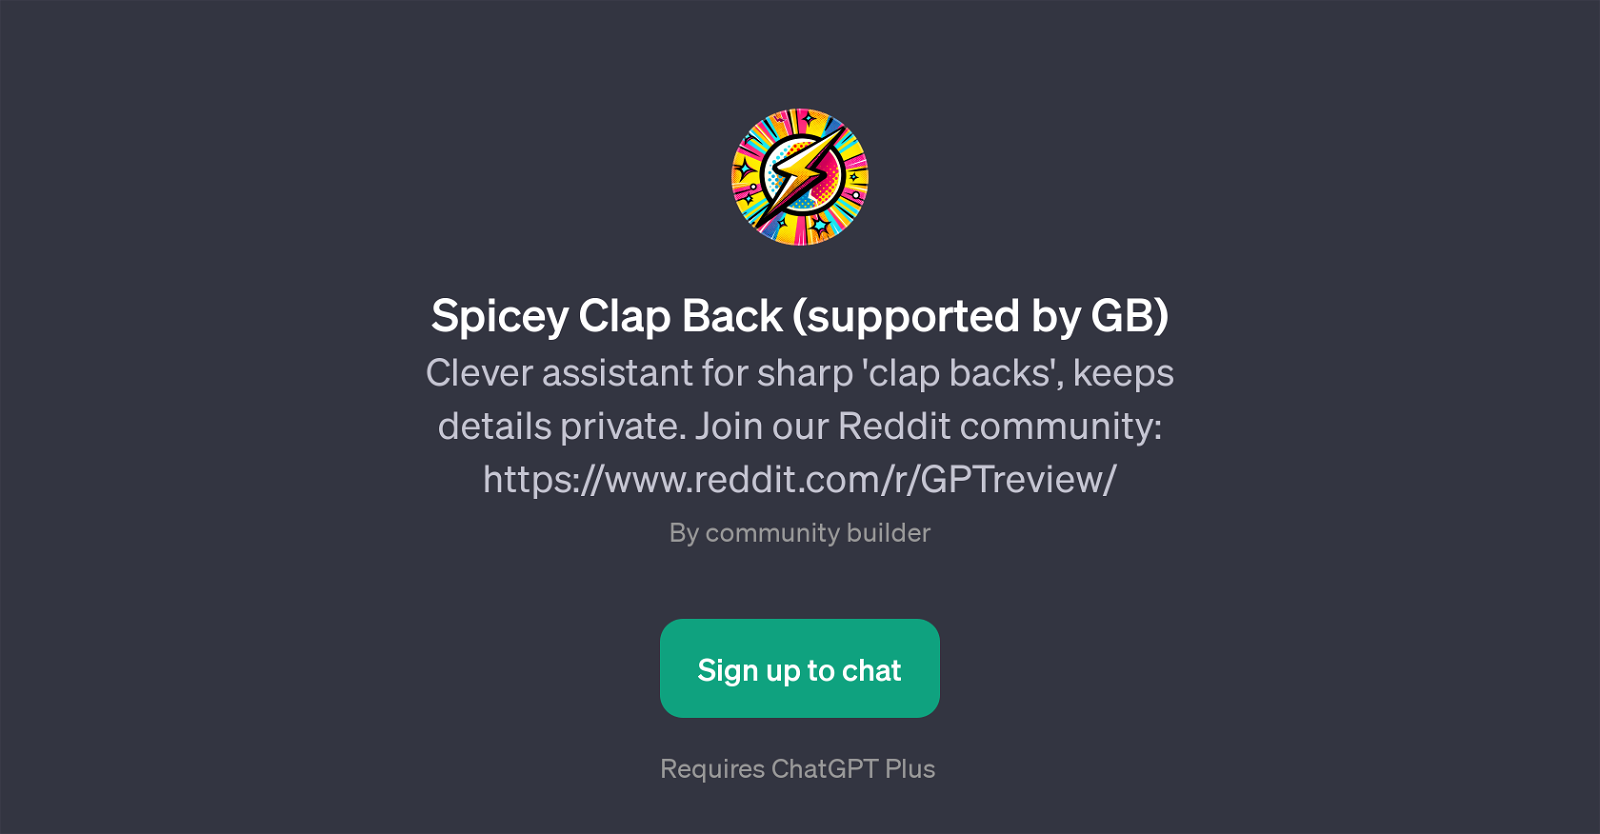 Spicey Clap Back website